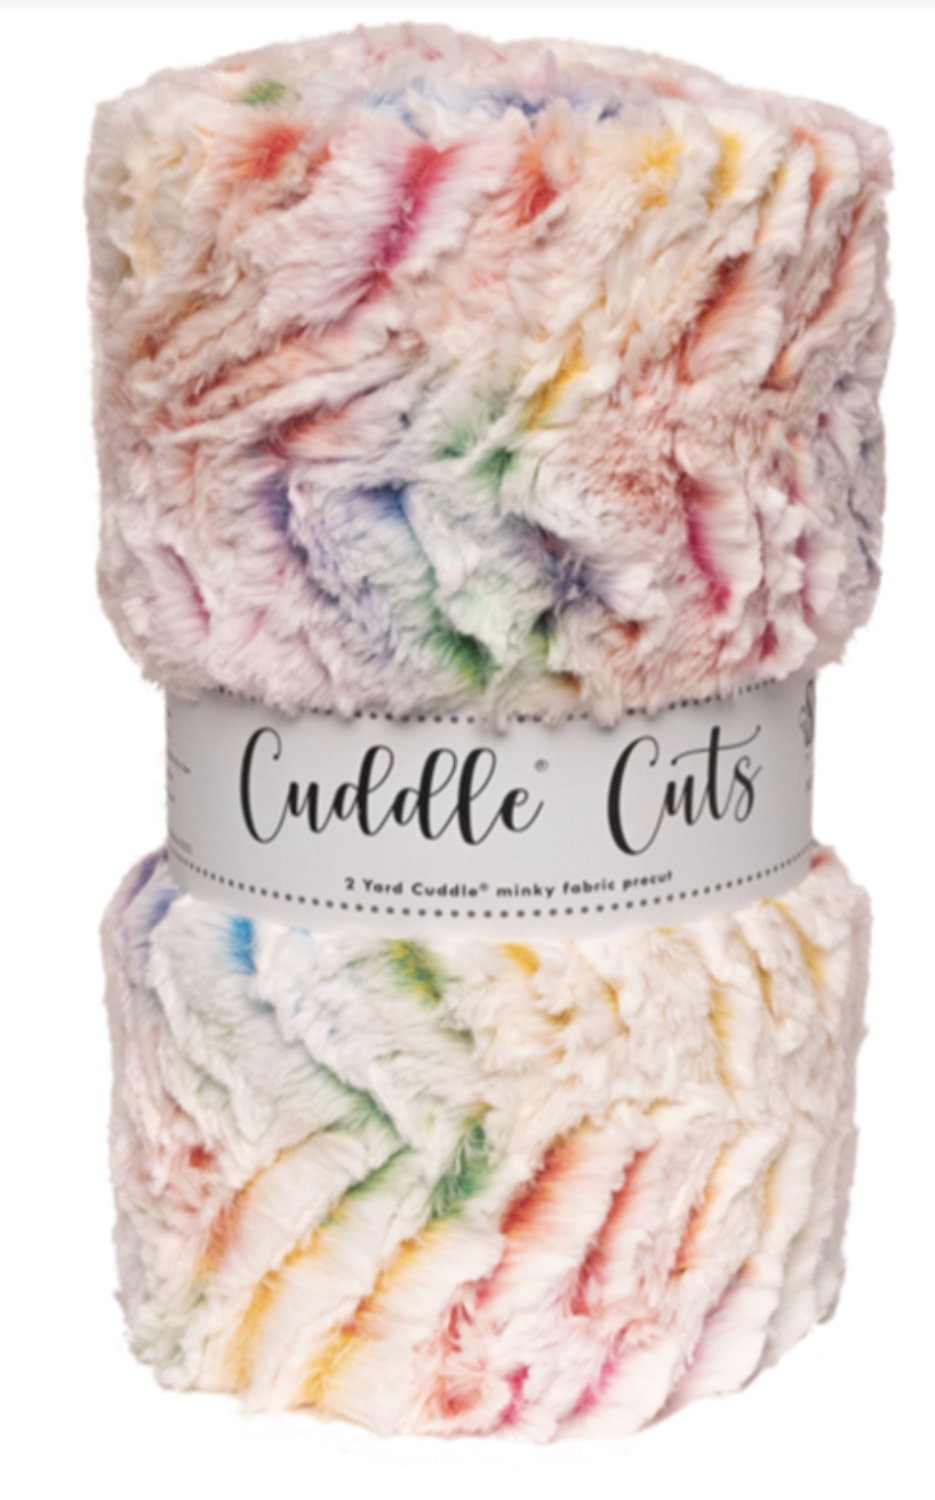 2 Yard Luxe Cuddle Cut - Prism Vibrant